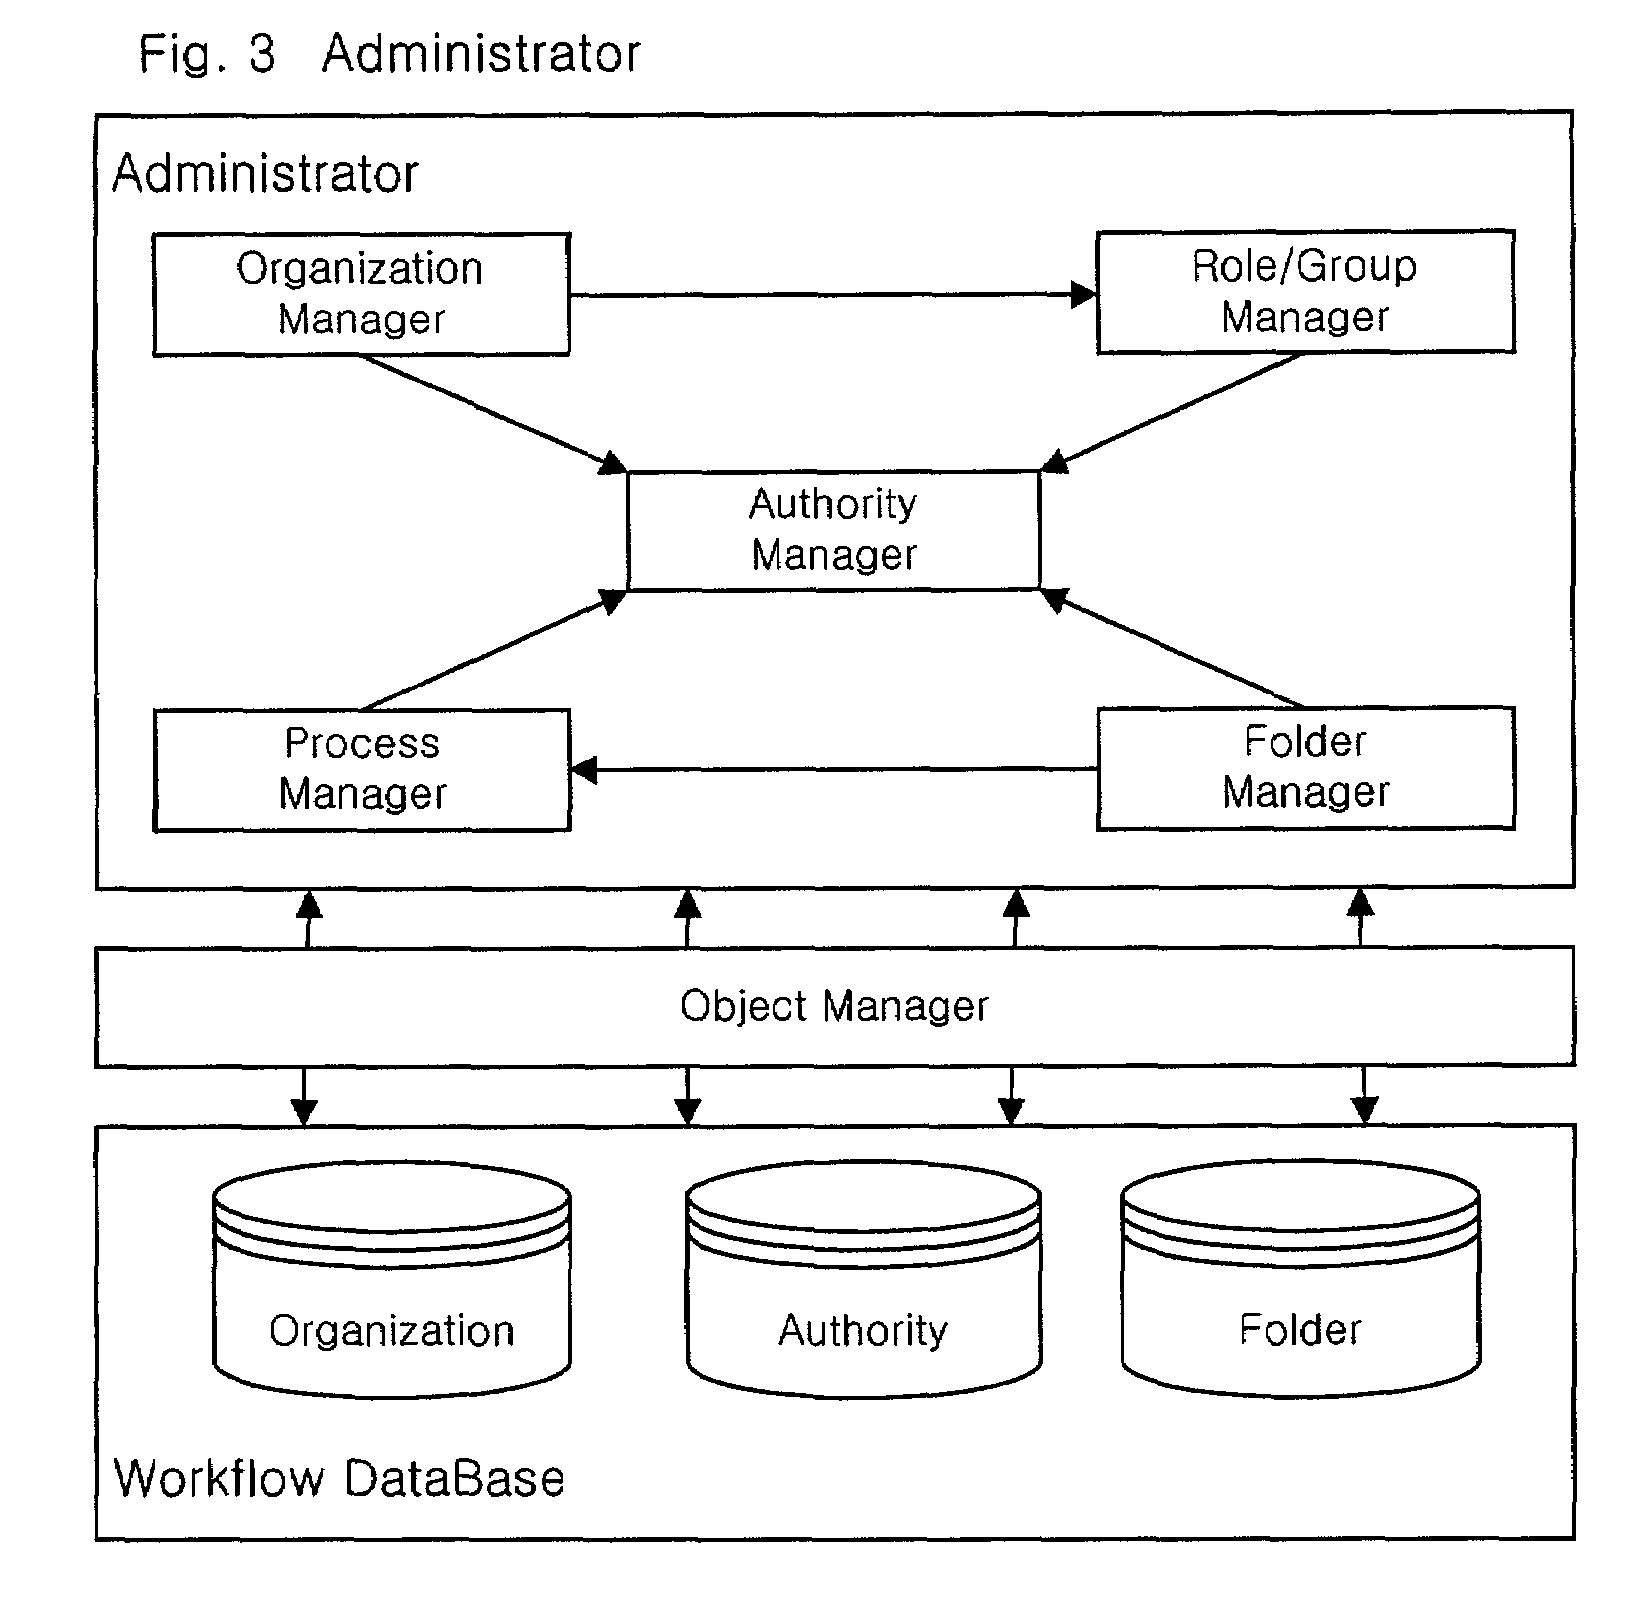 Systems and methods for automating a process of business decision making and workflow